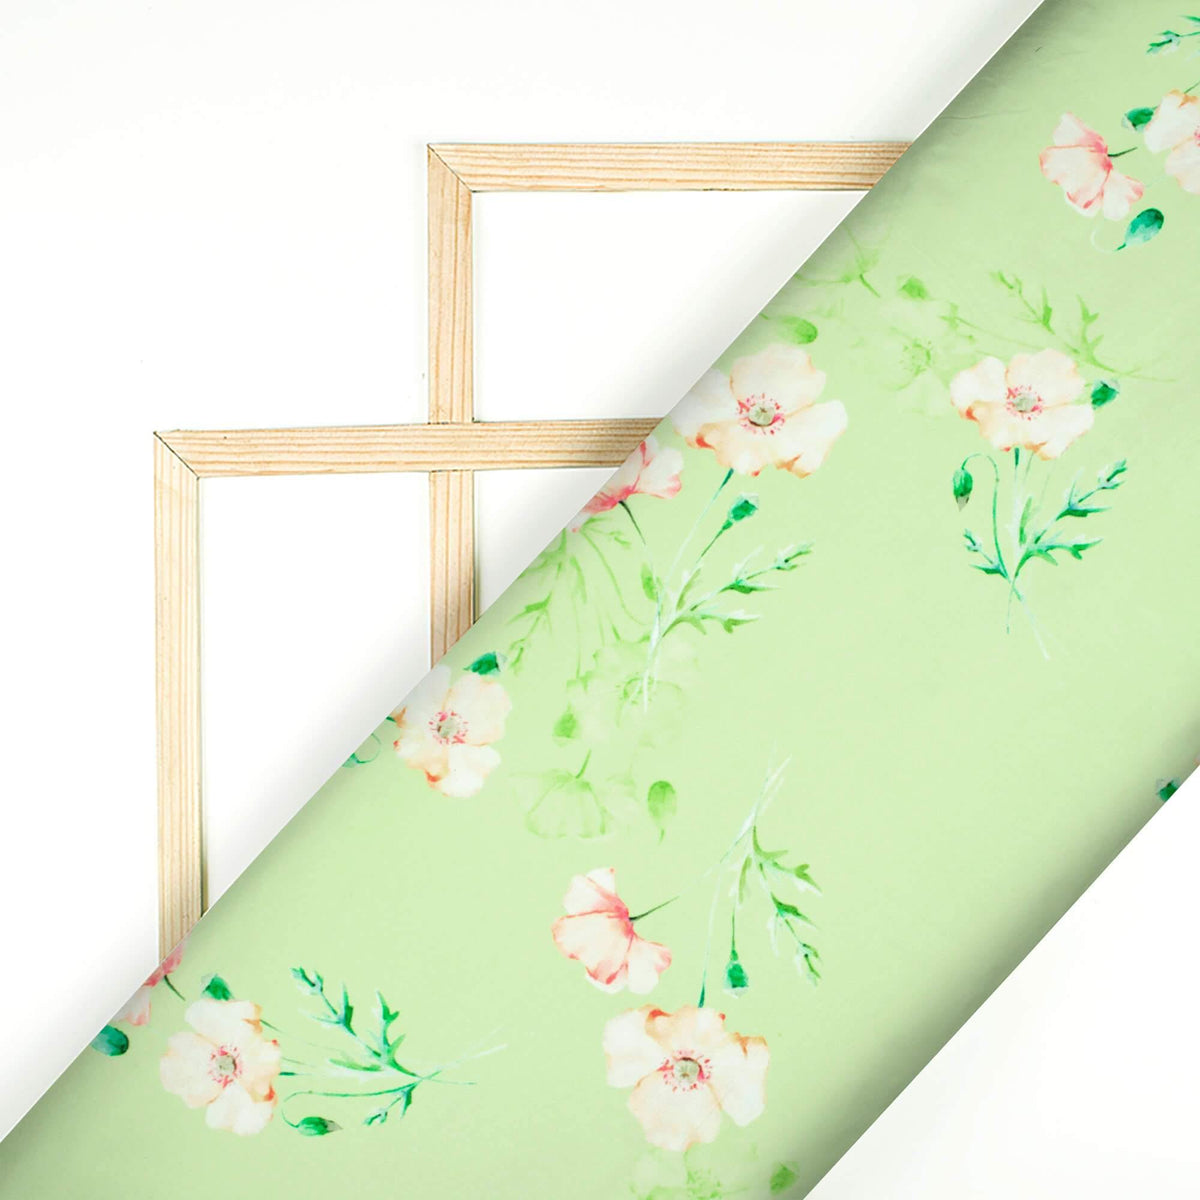 Lime Green And Taffy Pink Floral Pattern Digital Print Ultra Premium Butter Crepe Fabric - Fabcurate